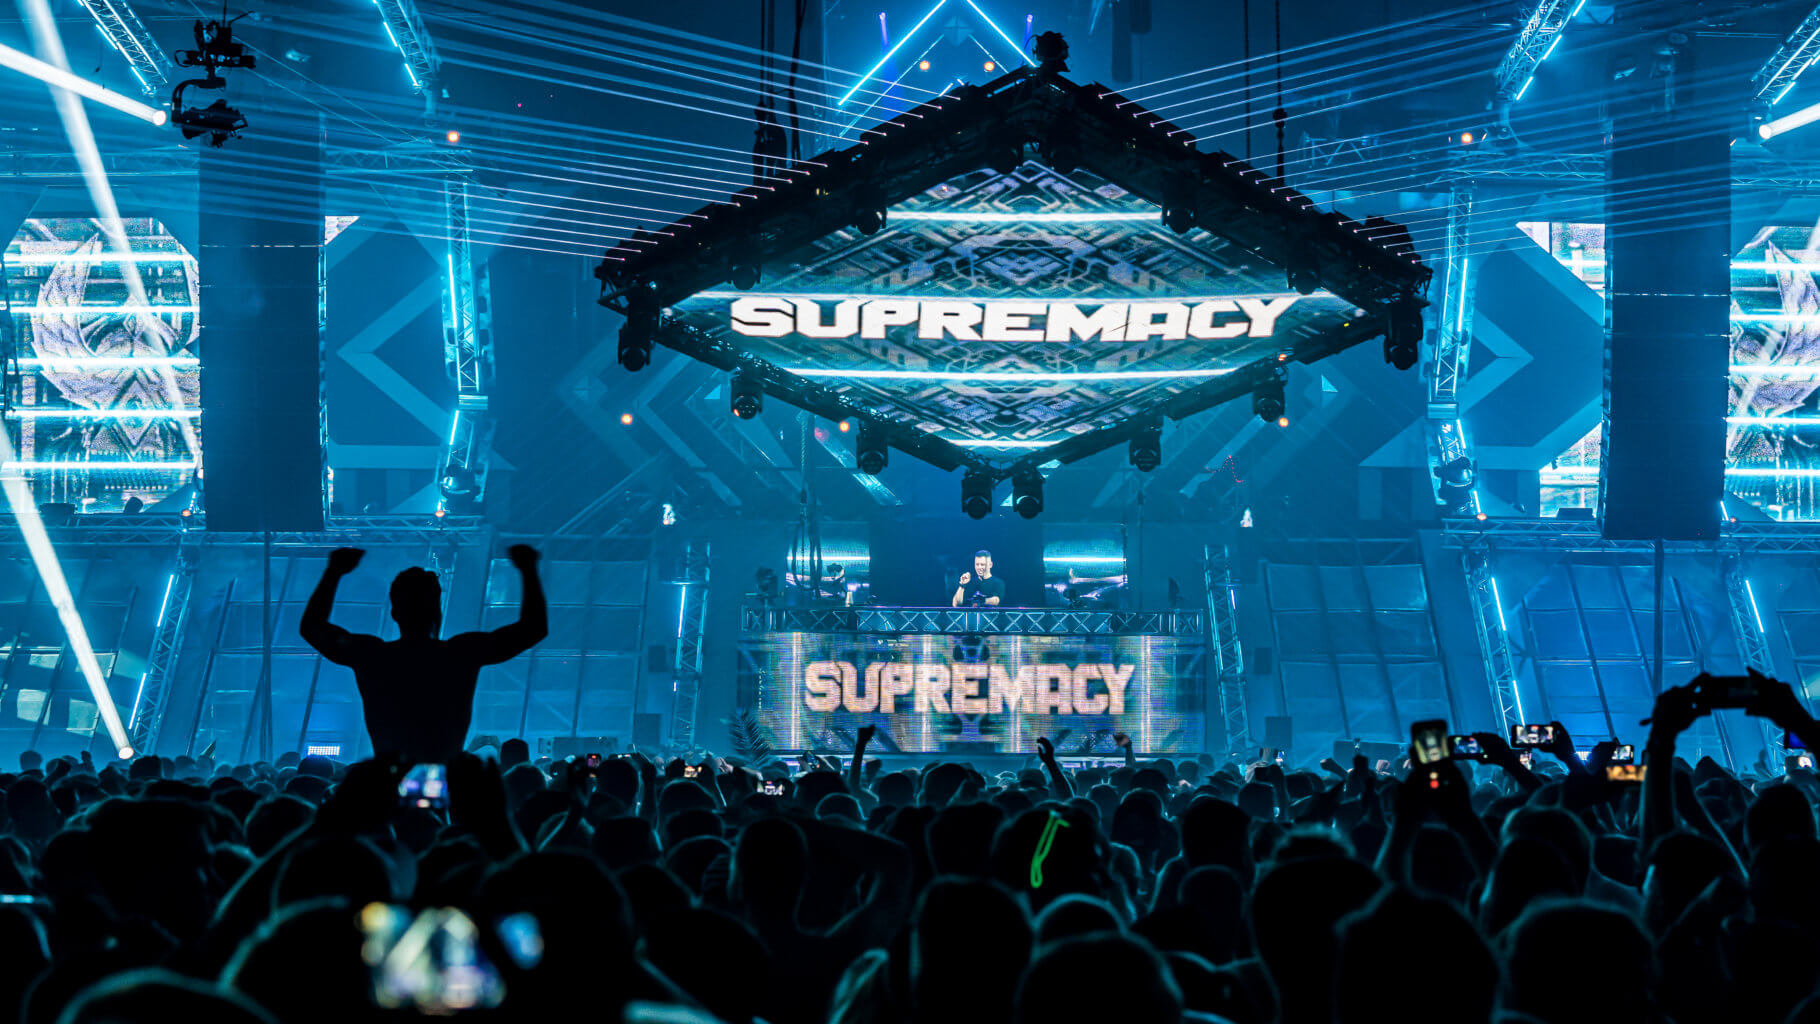 This is the official Supremacy 2022 trailer!